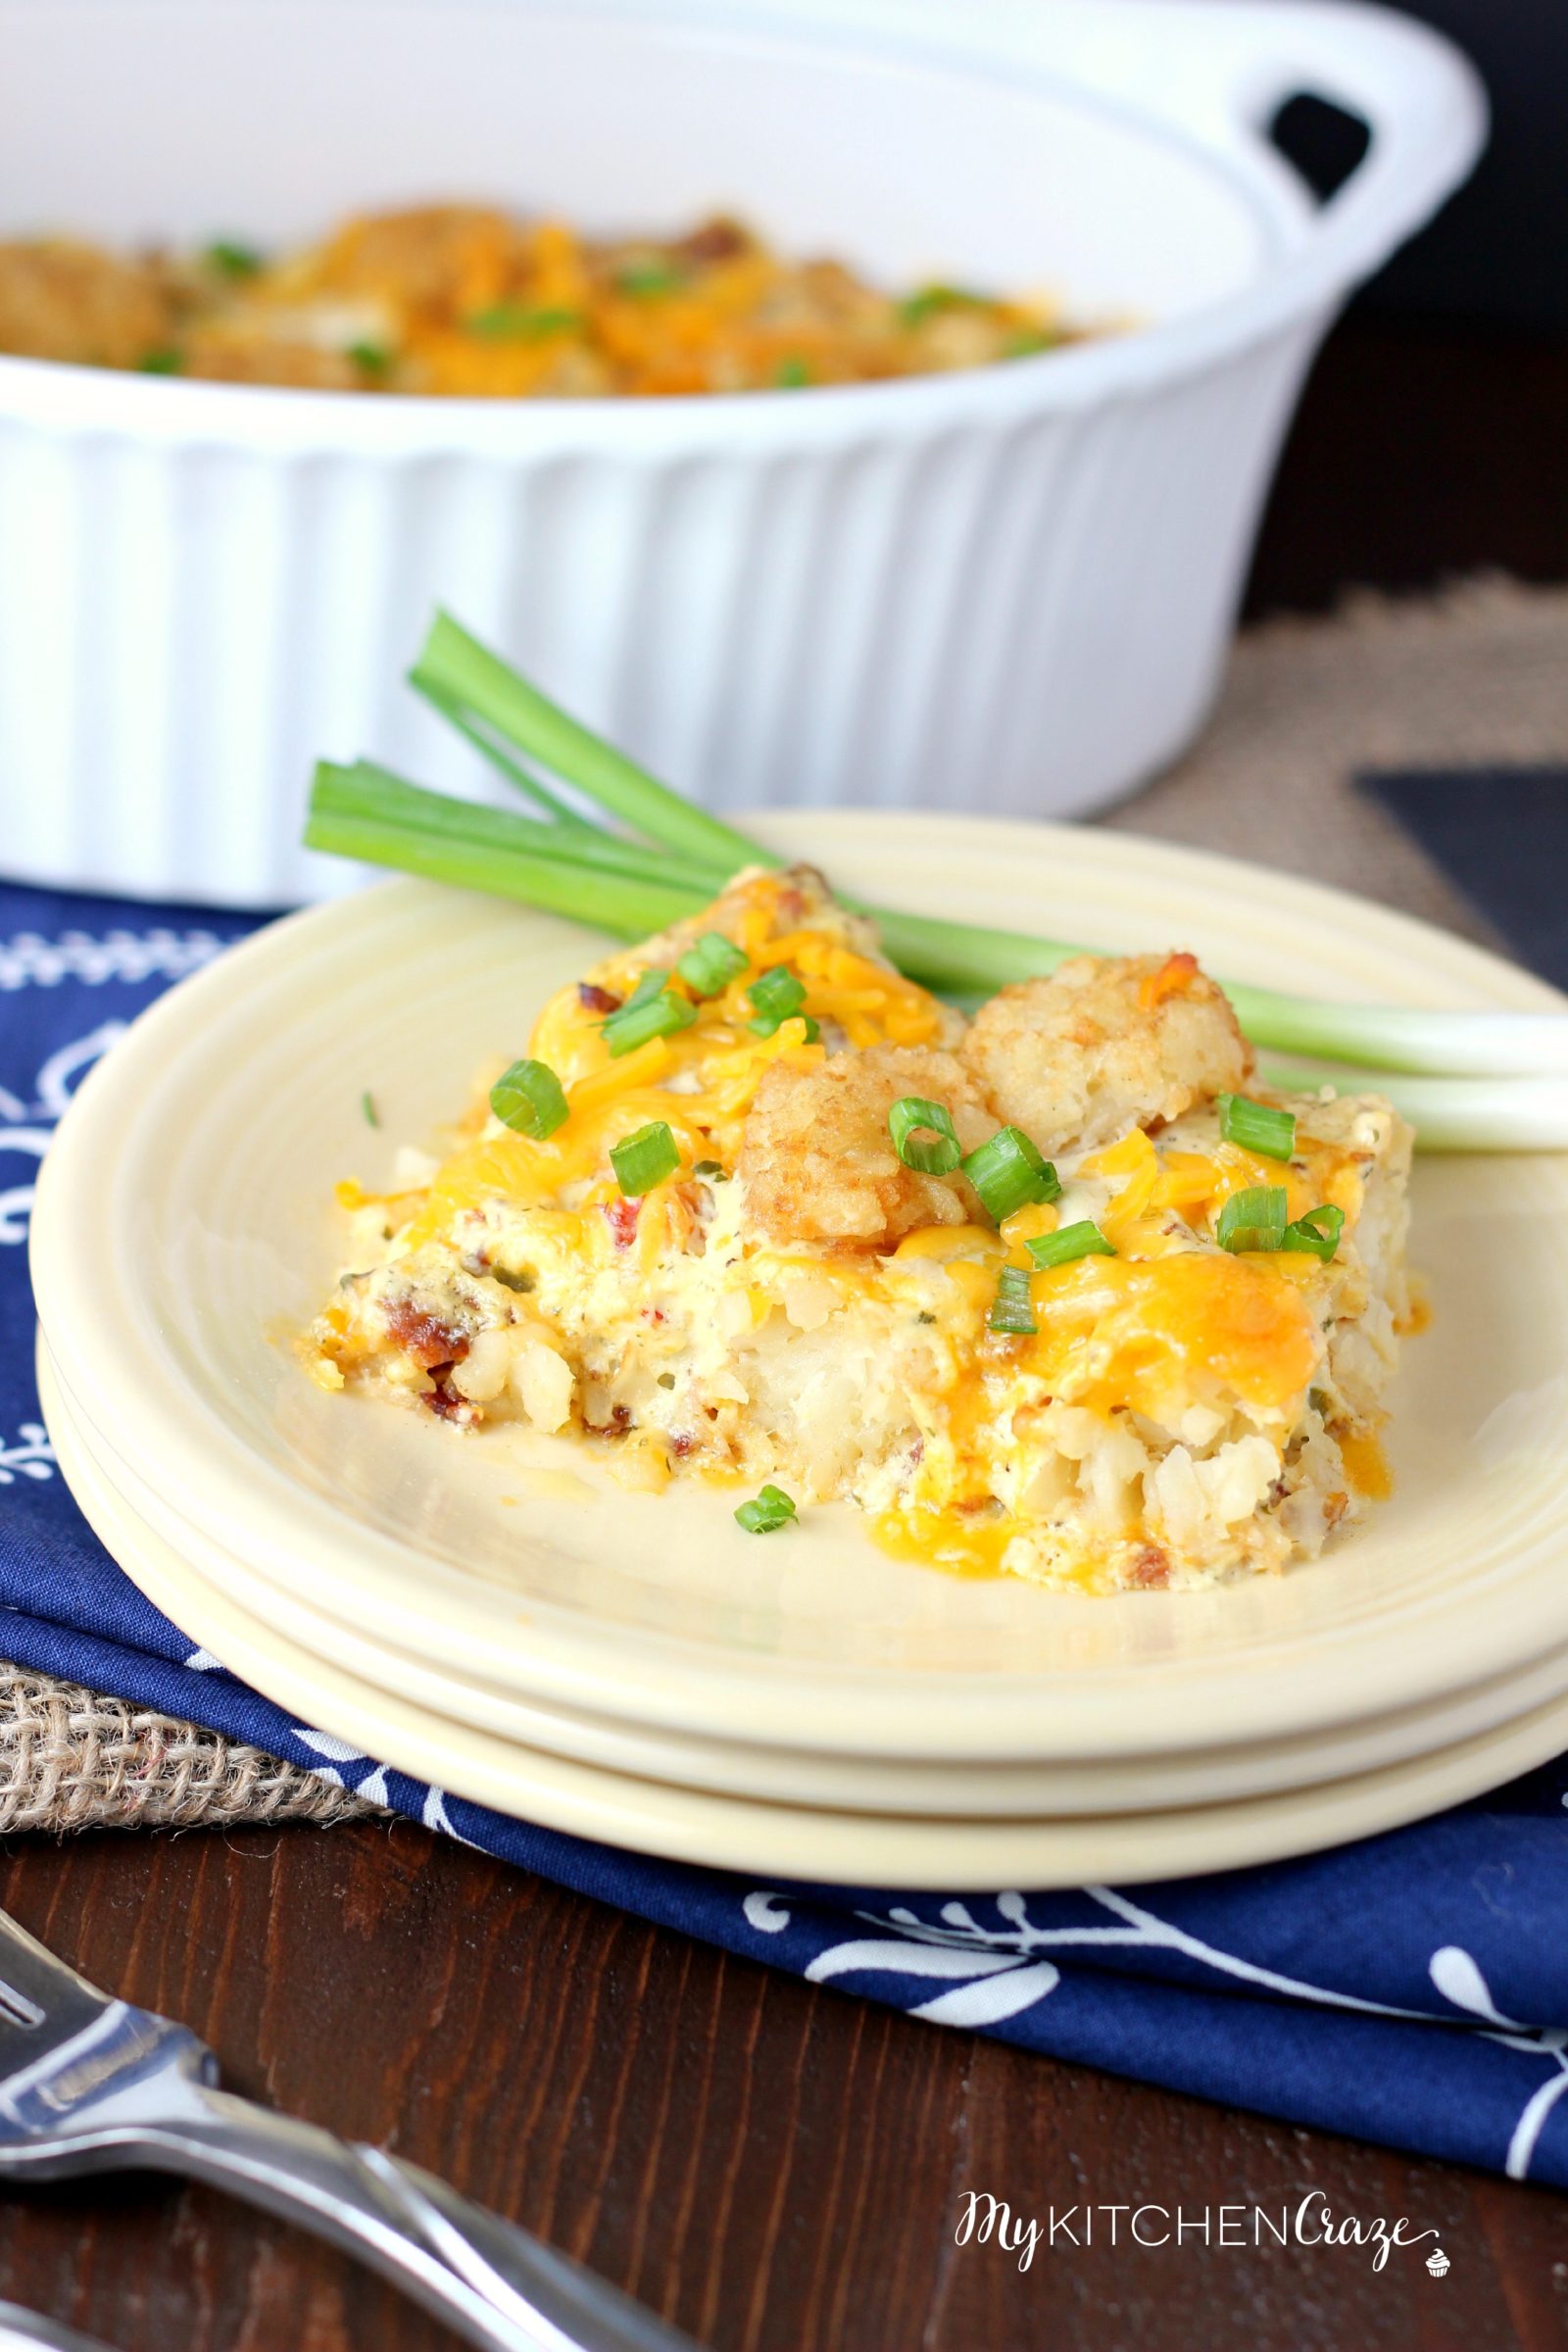 Chicken Ranch Tater Tot Casserole ~ mykitchencraze.com ~ Enjoy this easy no fuss casserole on those busy hectic nights. Creamy and loaded with tater tots. What could be better?